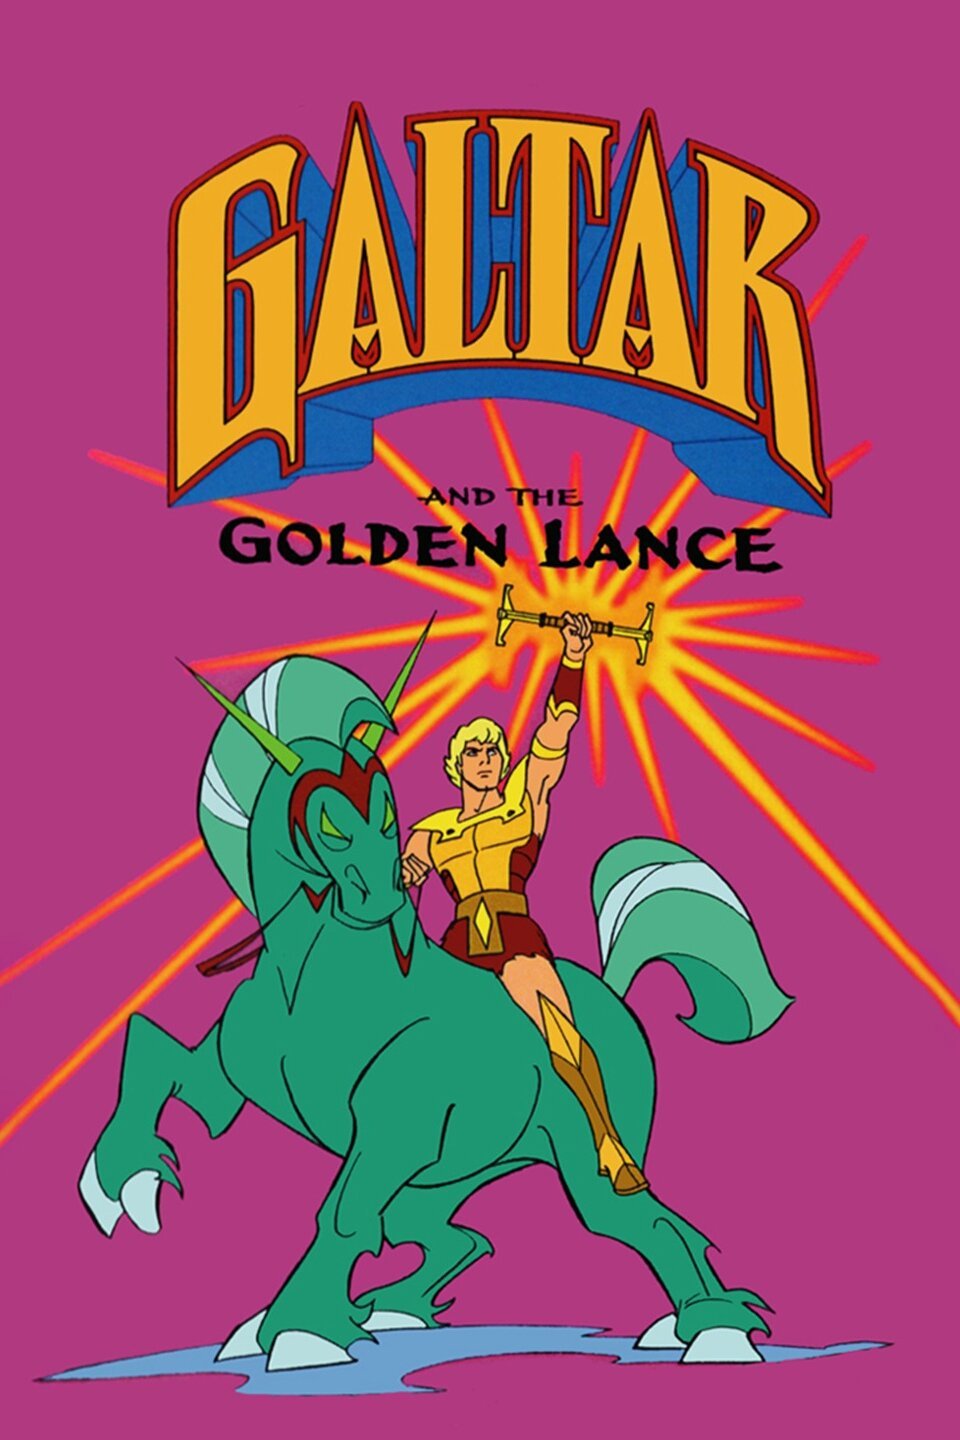 Galtar and the golden lance